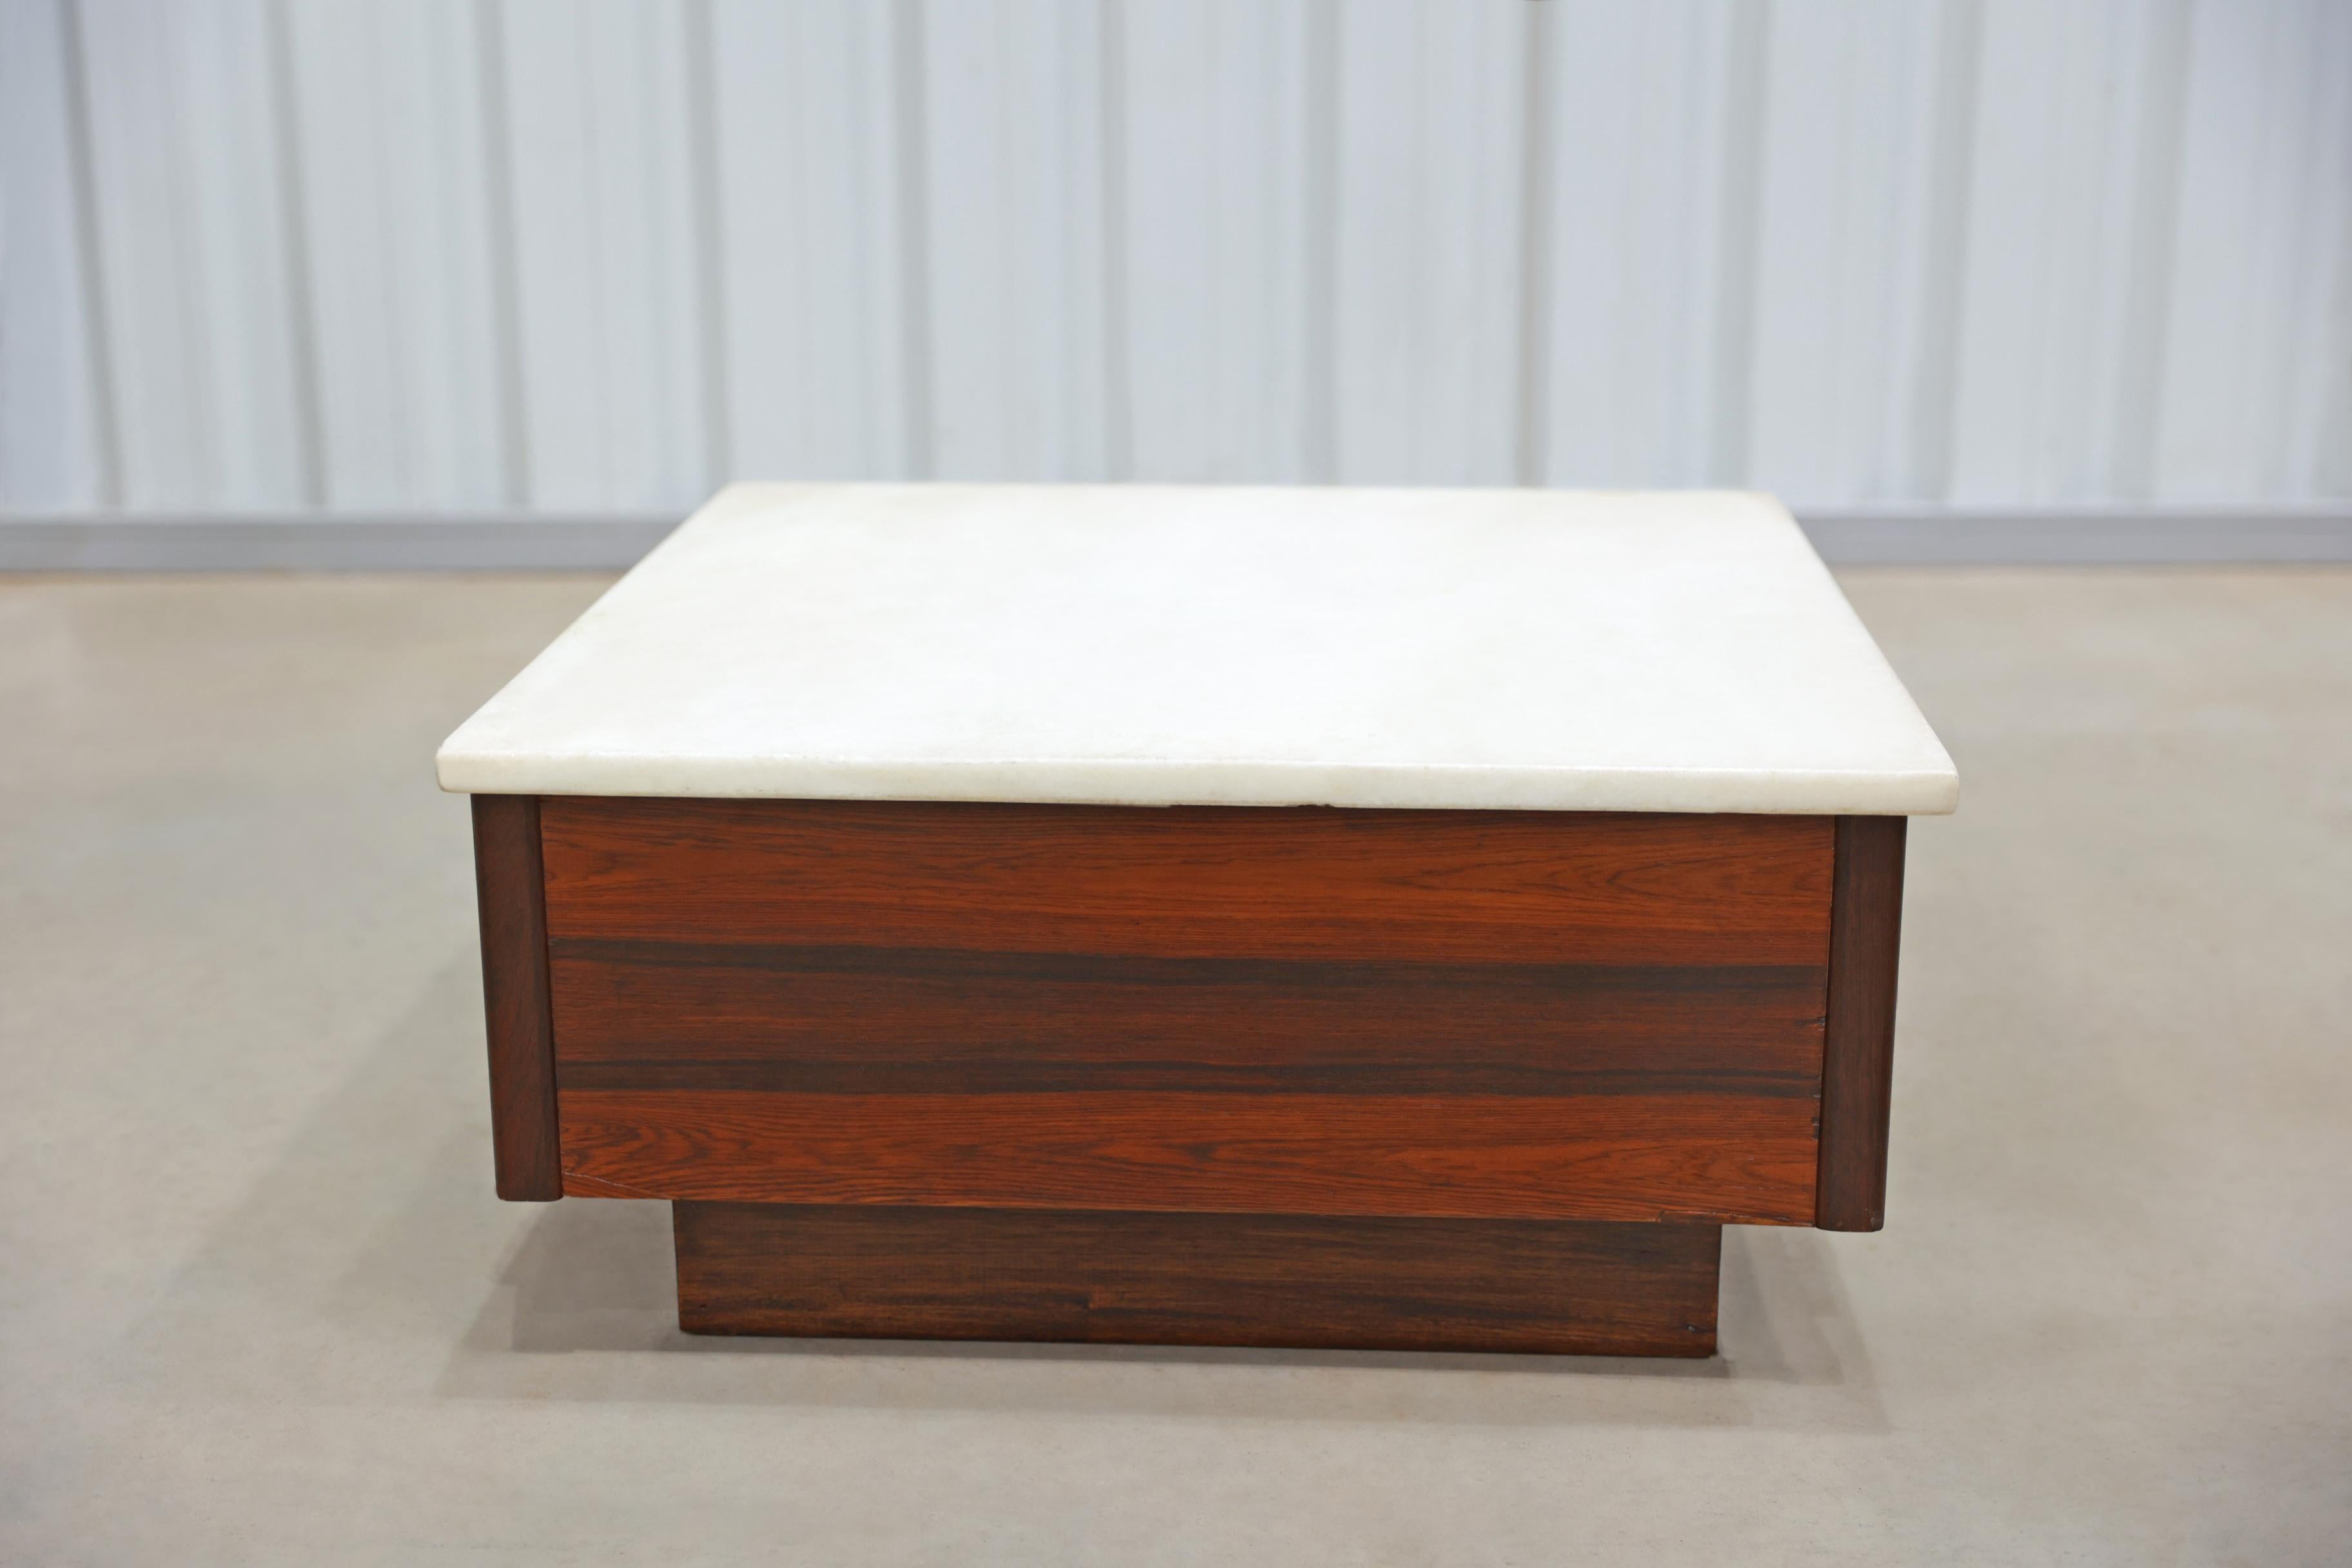 Brazilian Modern Coffee Table in Hardwood & Marble Top, Unknown, c. 1960 In Good Condition For Sale In New York, NY